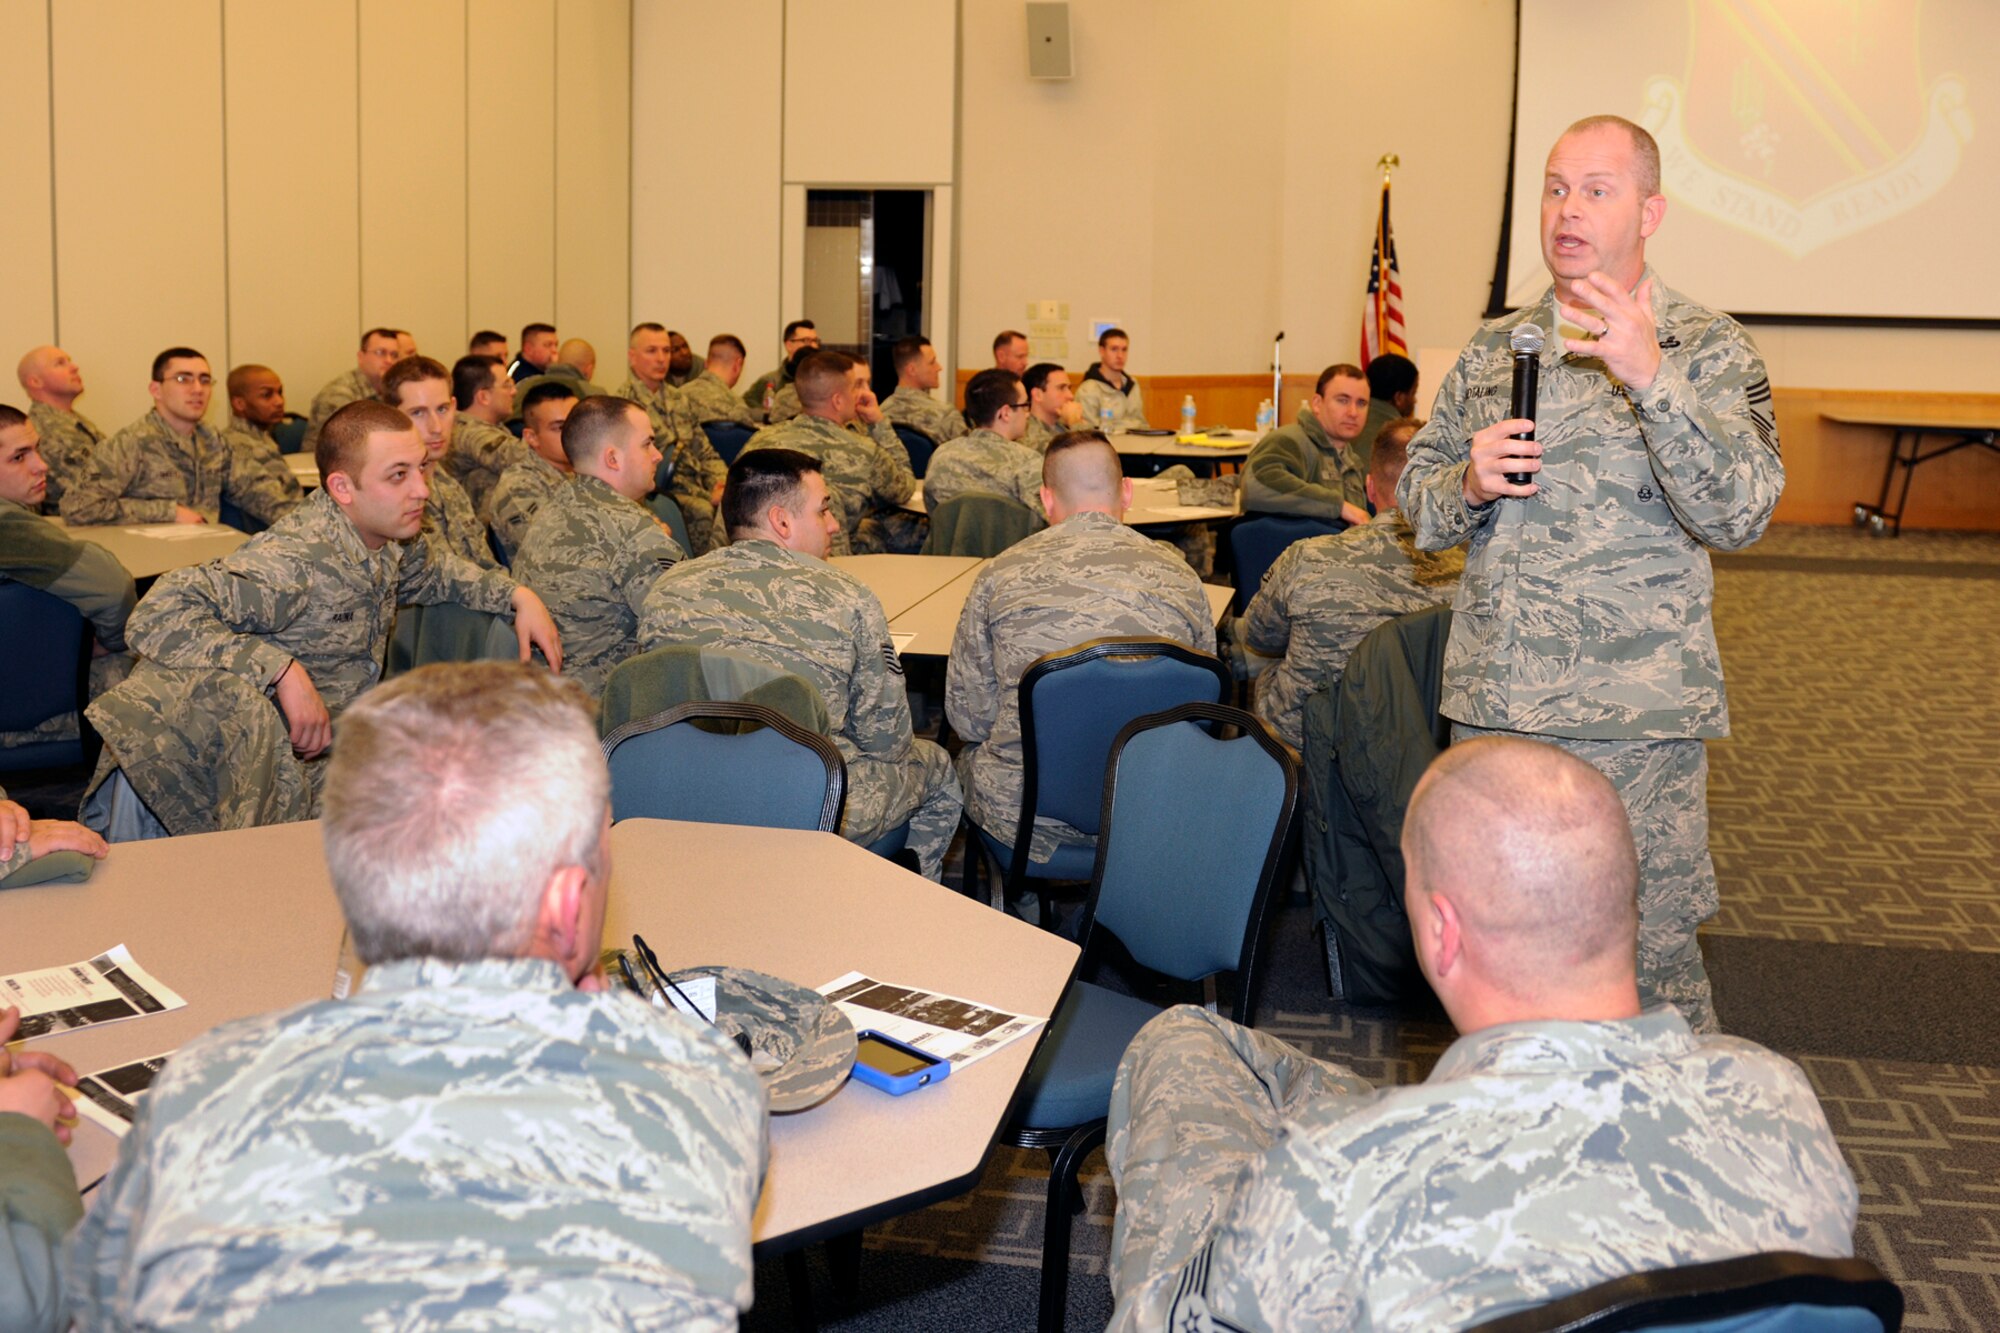 140309-Z-EZ686-026 -- Chief Master Sgt. James Hotaling speaks with enlisted members of the 127th Wing, Michigan Air National Guard, at Selfridge Air National Guard Base, March 8, 2014. Hotaling serves as the command chief of the Air National Guard and is responsible for matters influencing the health, morale and welfare of the roughly 90,000 enlisted Airmen in the Air National Guard and their families. (Air National Guard photo by MSgt. David Kujawa / Released)